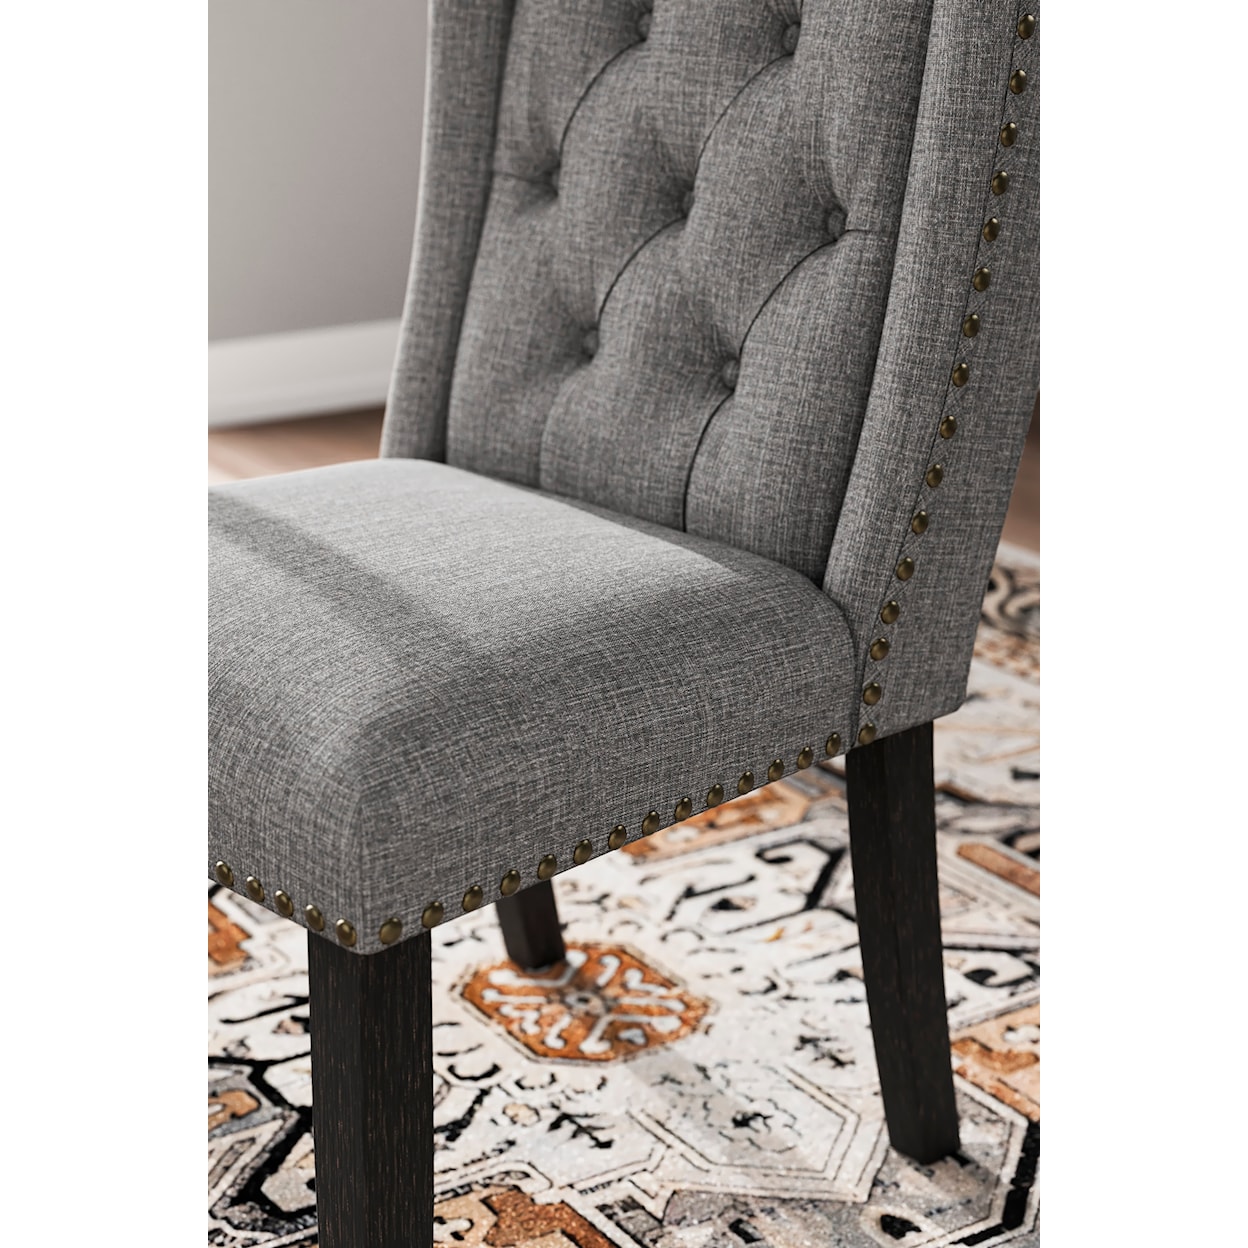 Ashley Signature Design Jeanette Dining Chair